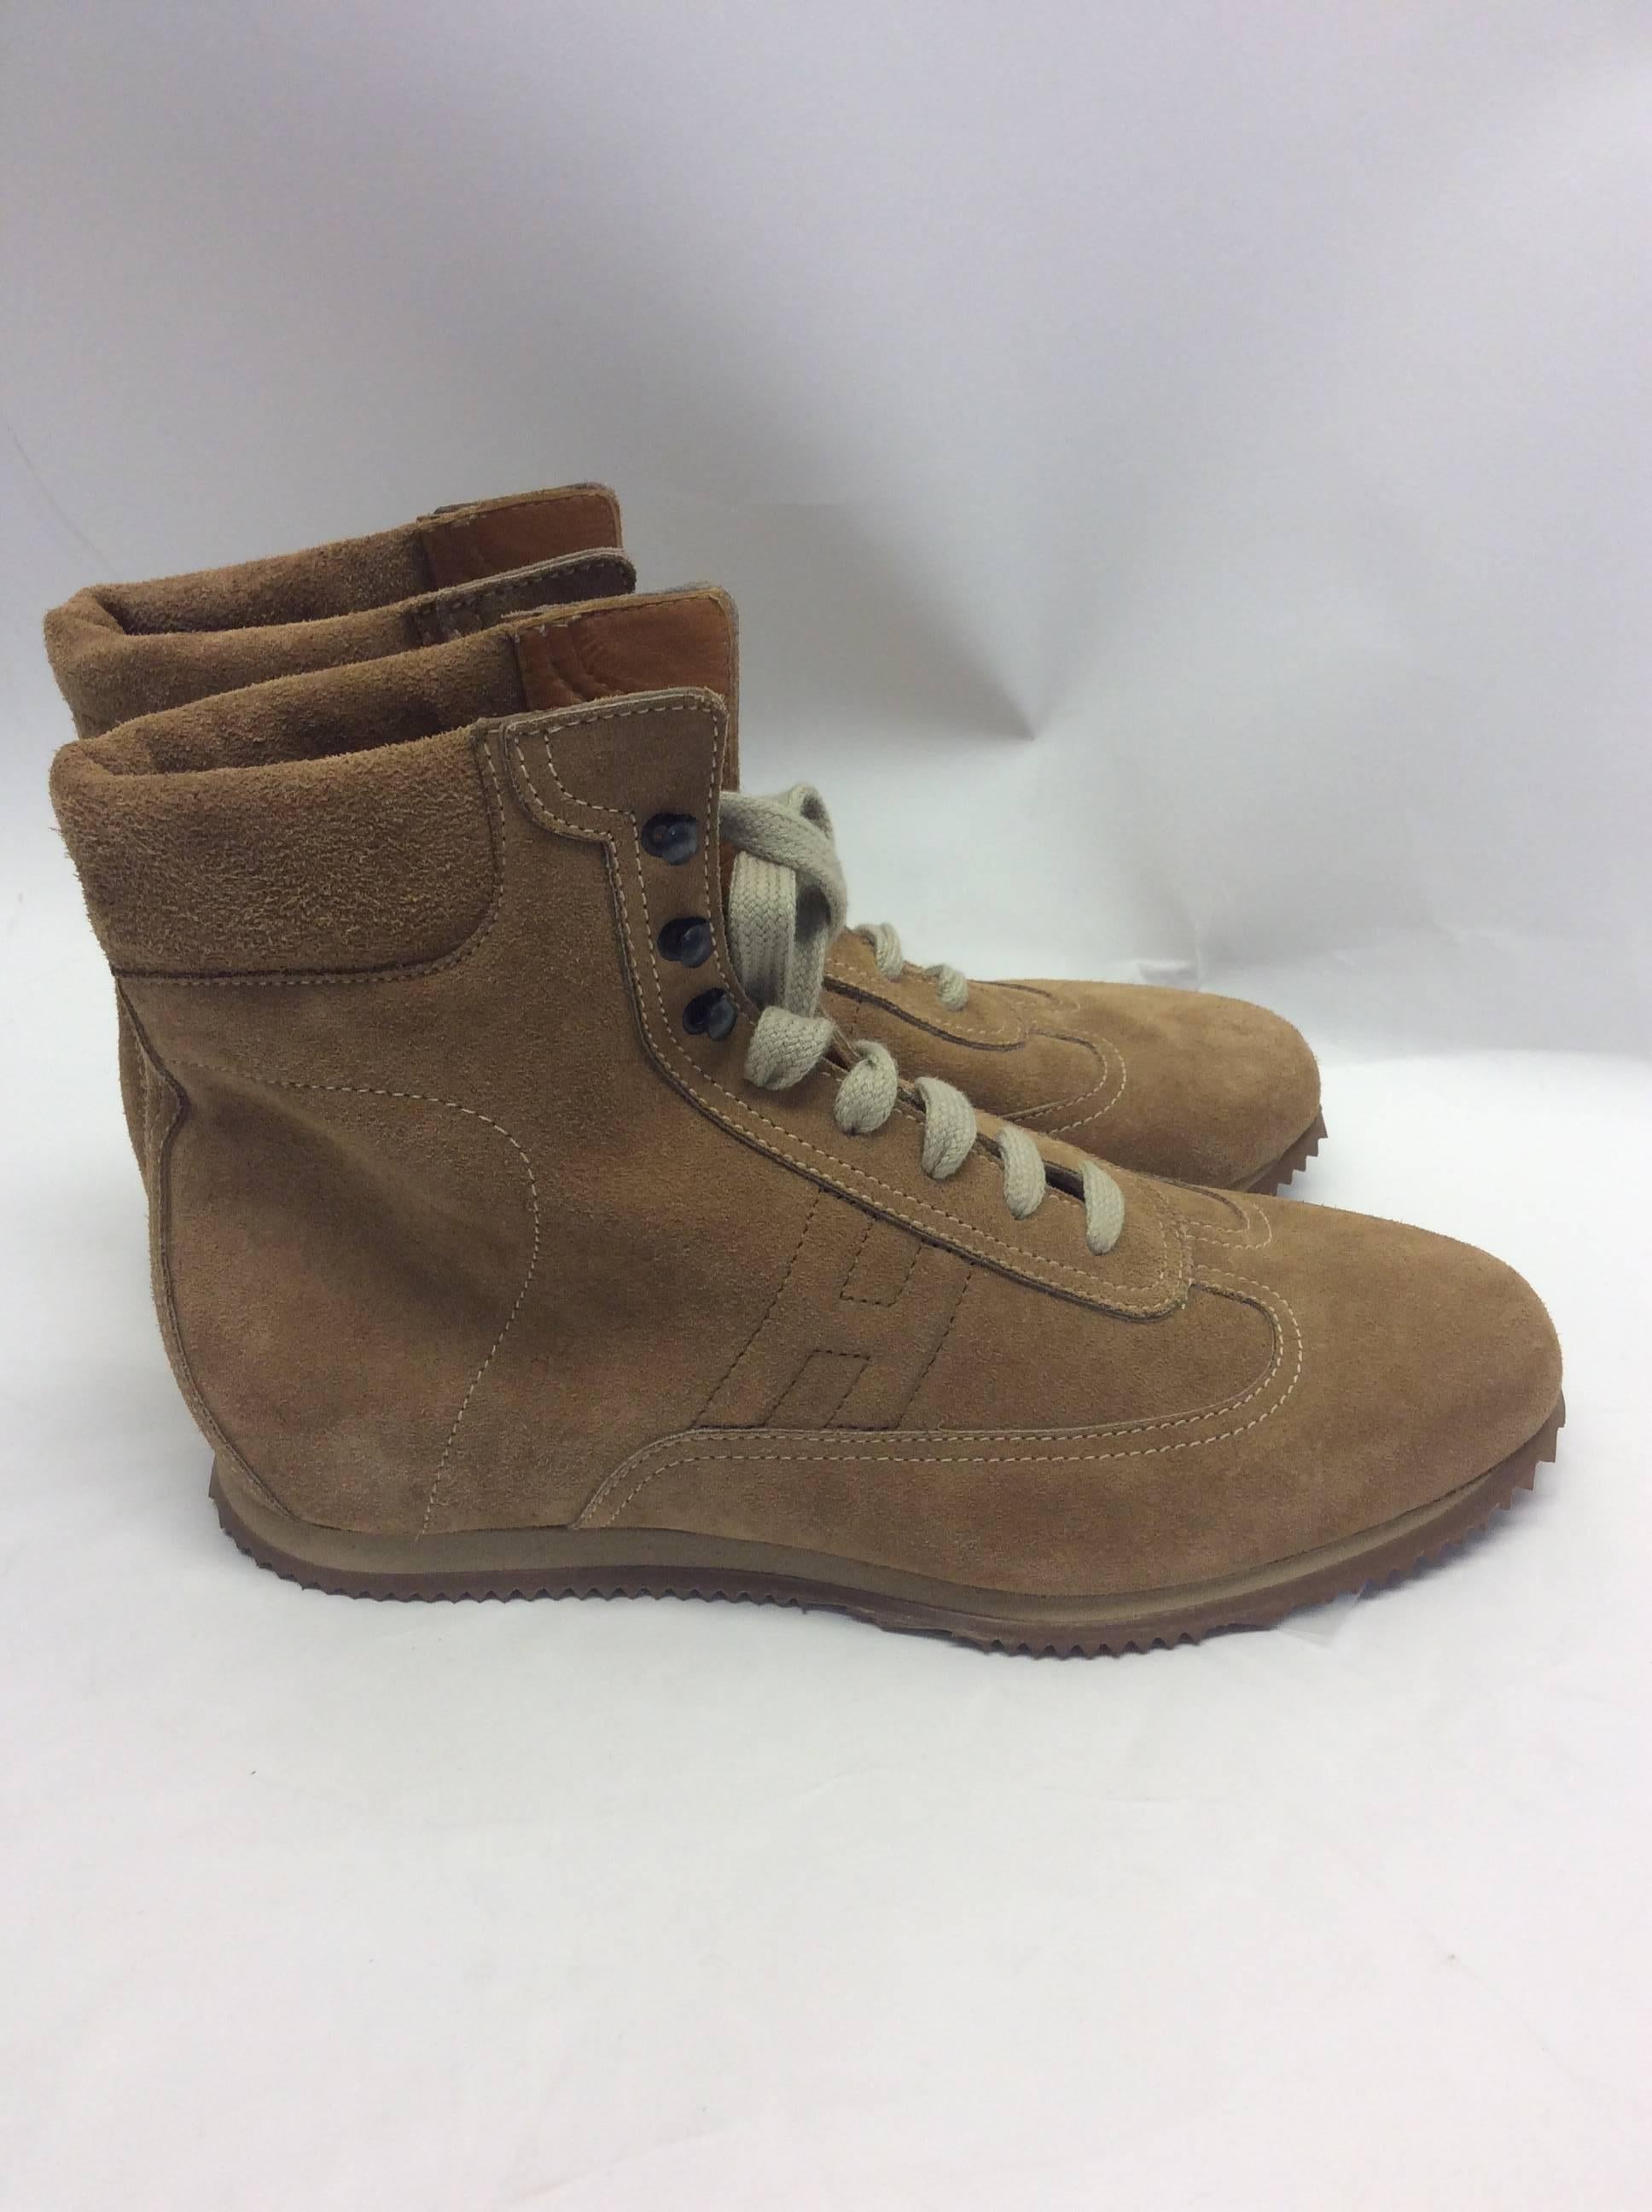 Hermes Suede Lace Up Camel Shoes In Good Condition For Sale In Narberth, PA